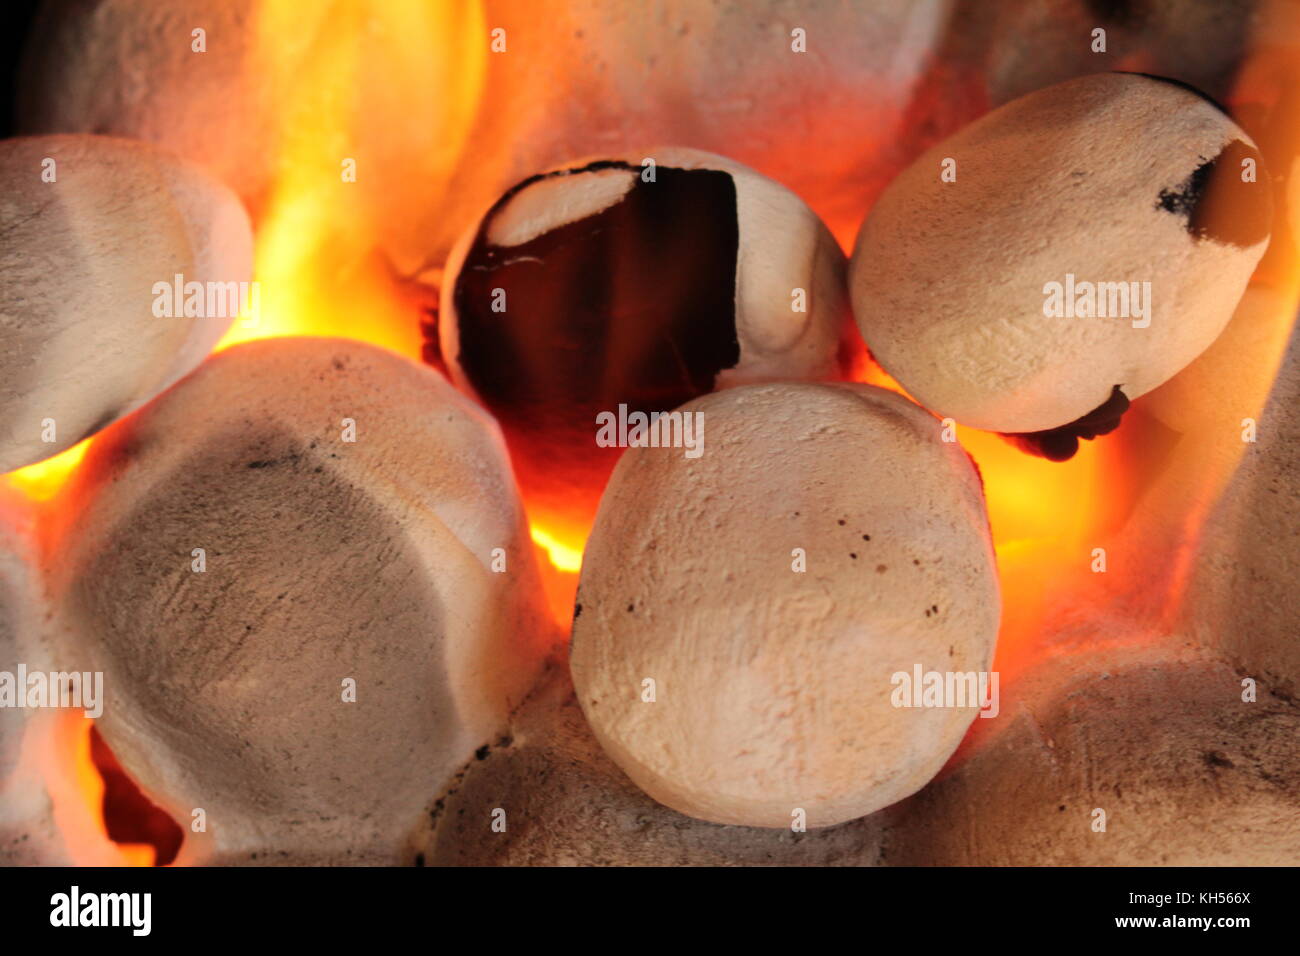 Close up of gas fire coals with yellow orange flames, glowing orange, and with soot on two of coals. Stock Photo